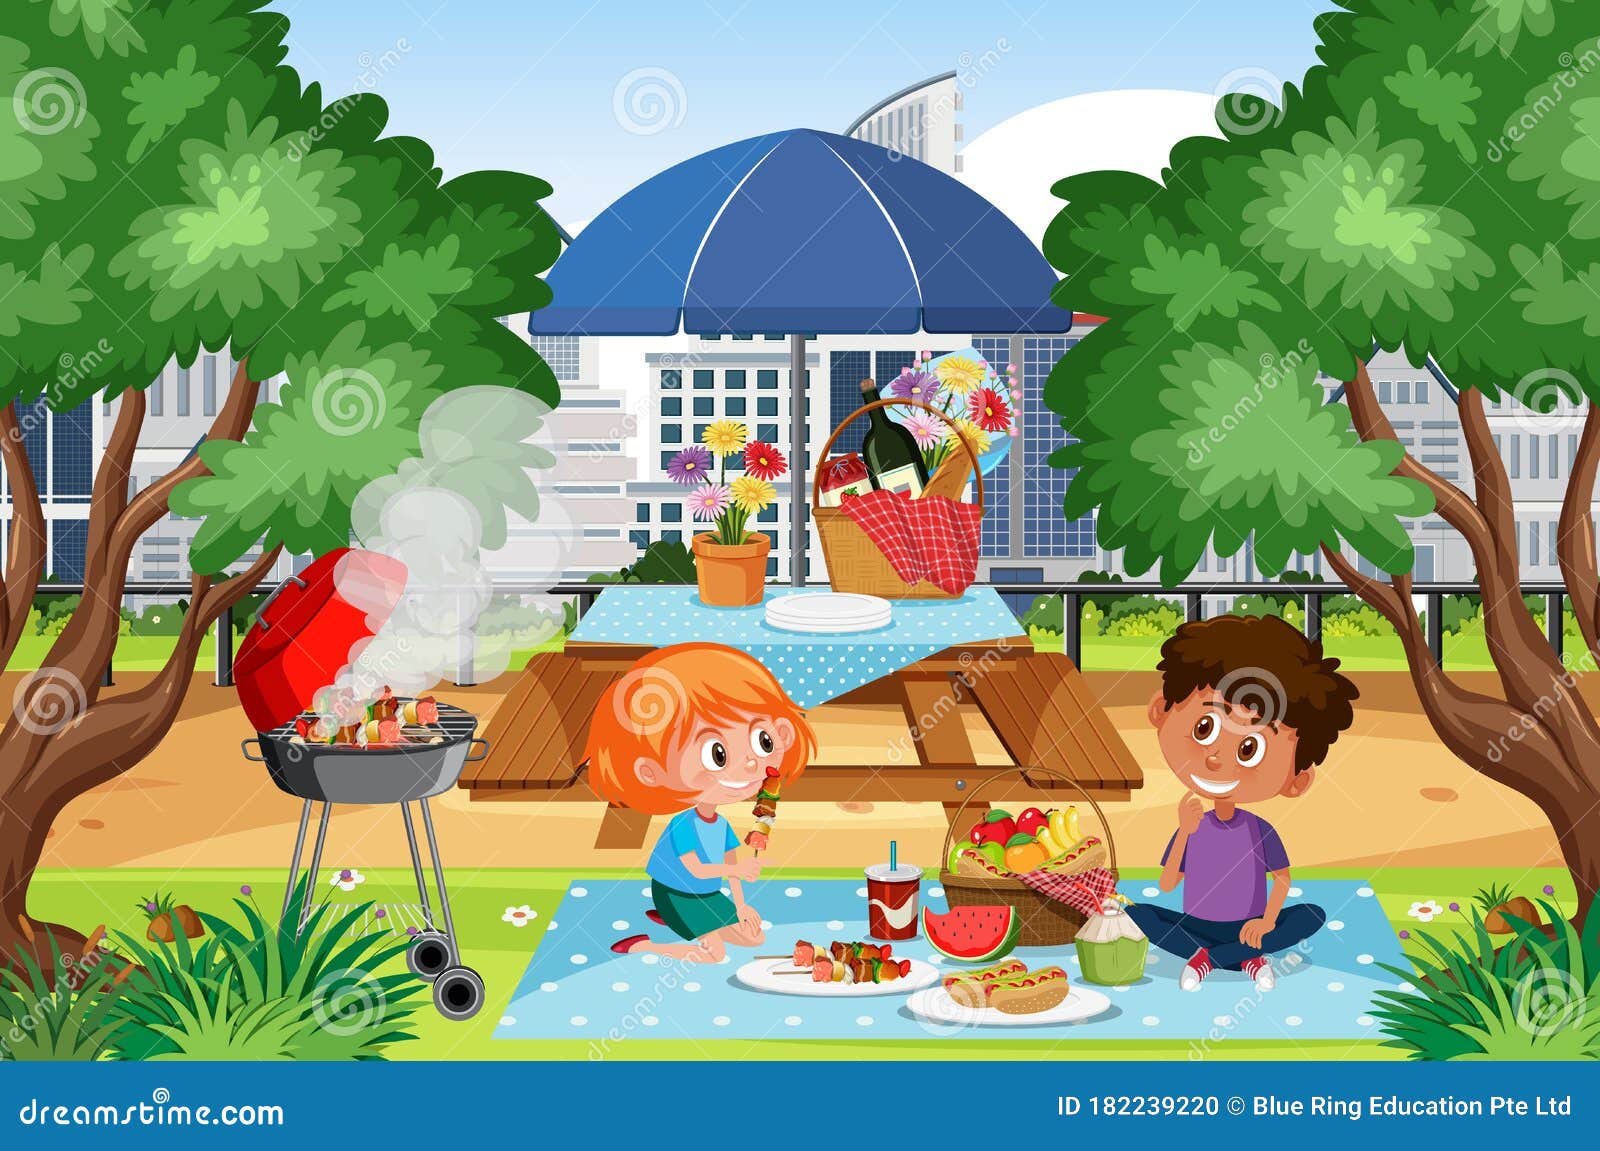 Scene with Kids Having Picnic in the Park Stock Vector - Illustration of  outdoor, barbecue: 182239220